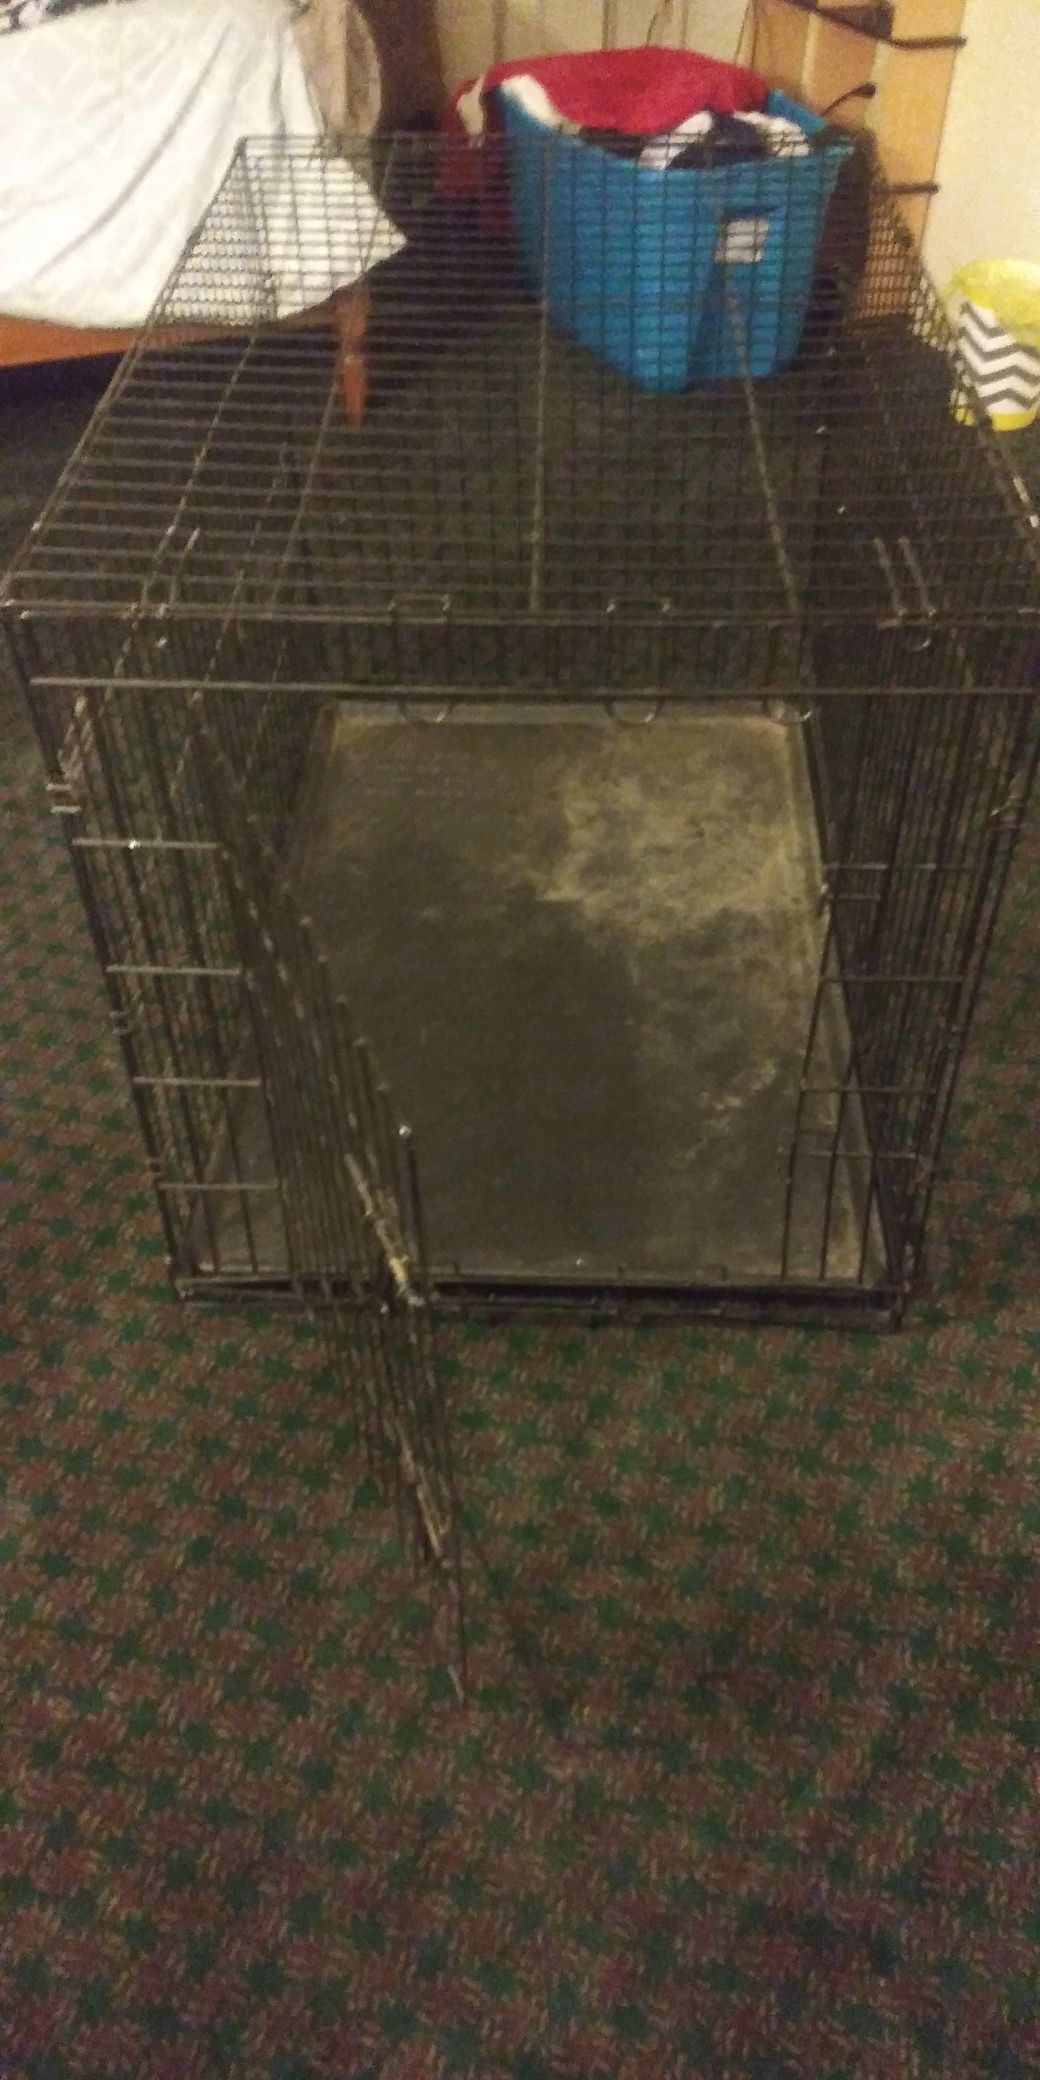 Cage for our best friend...anytime